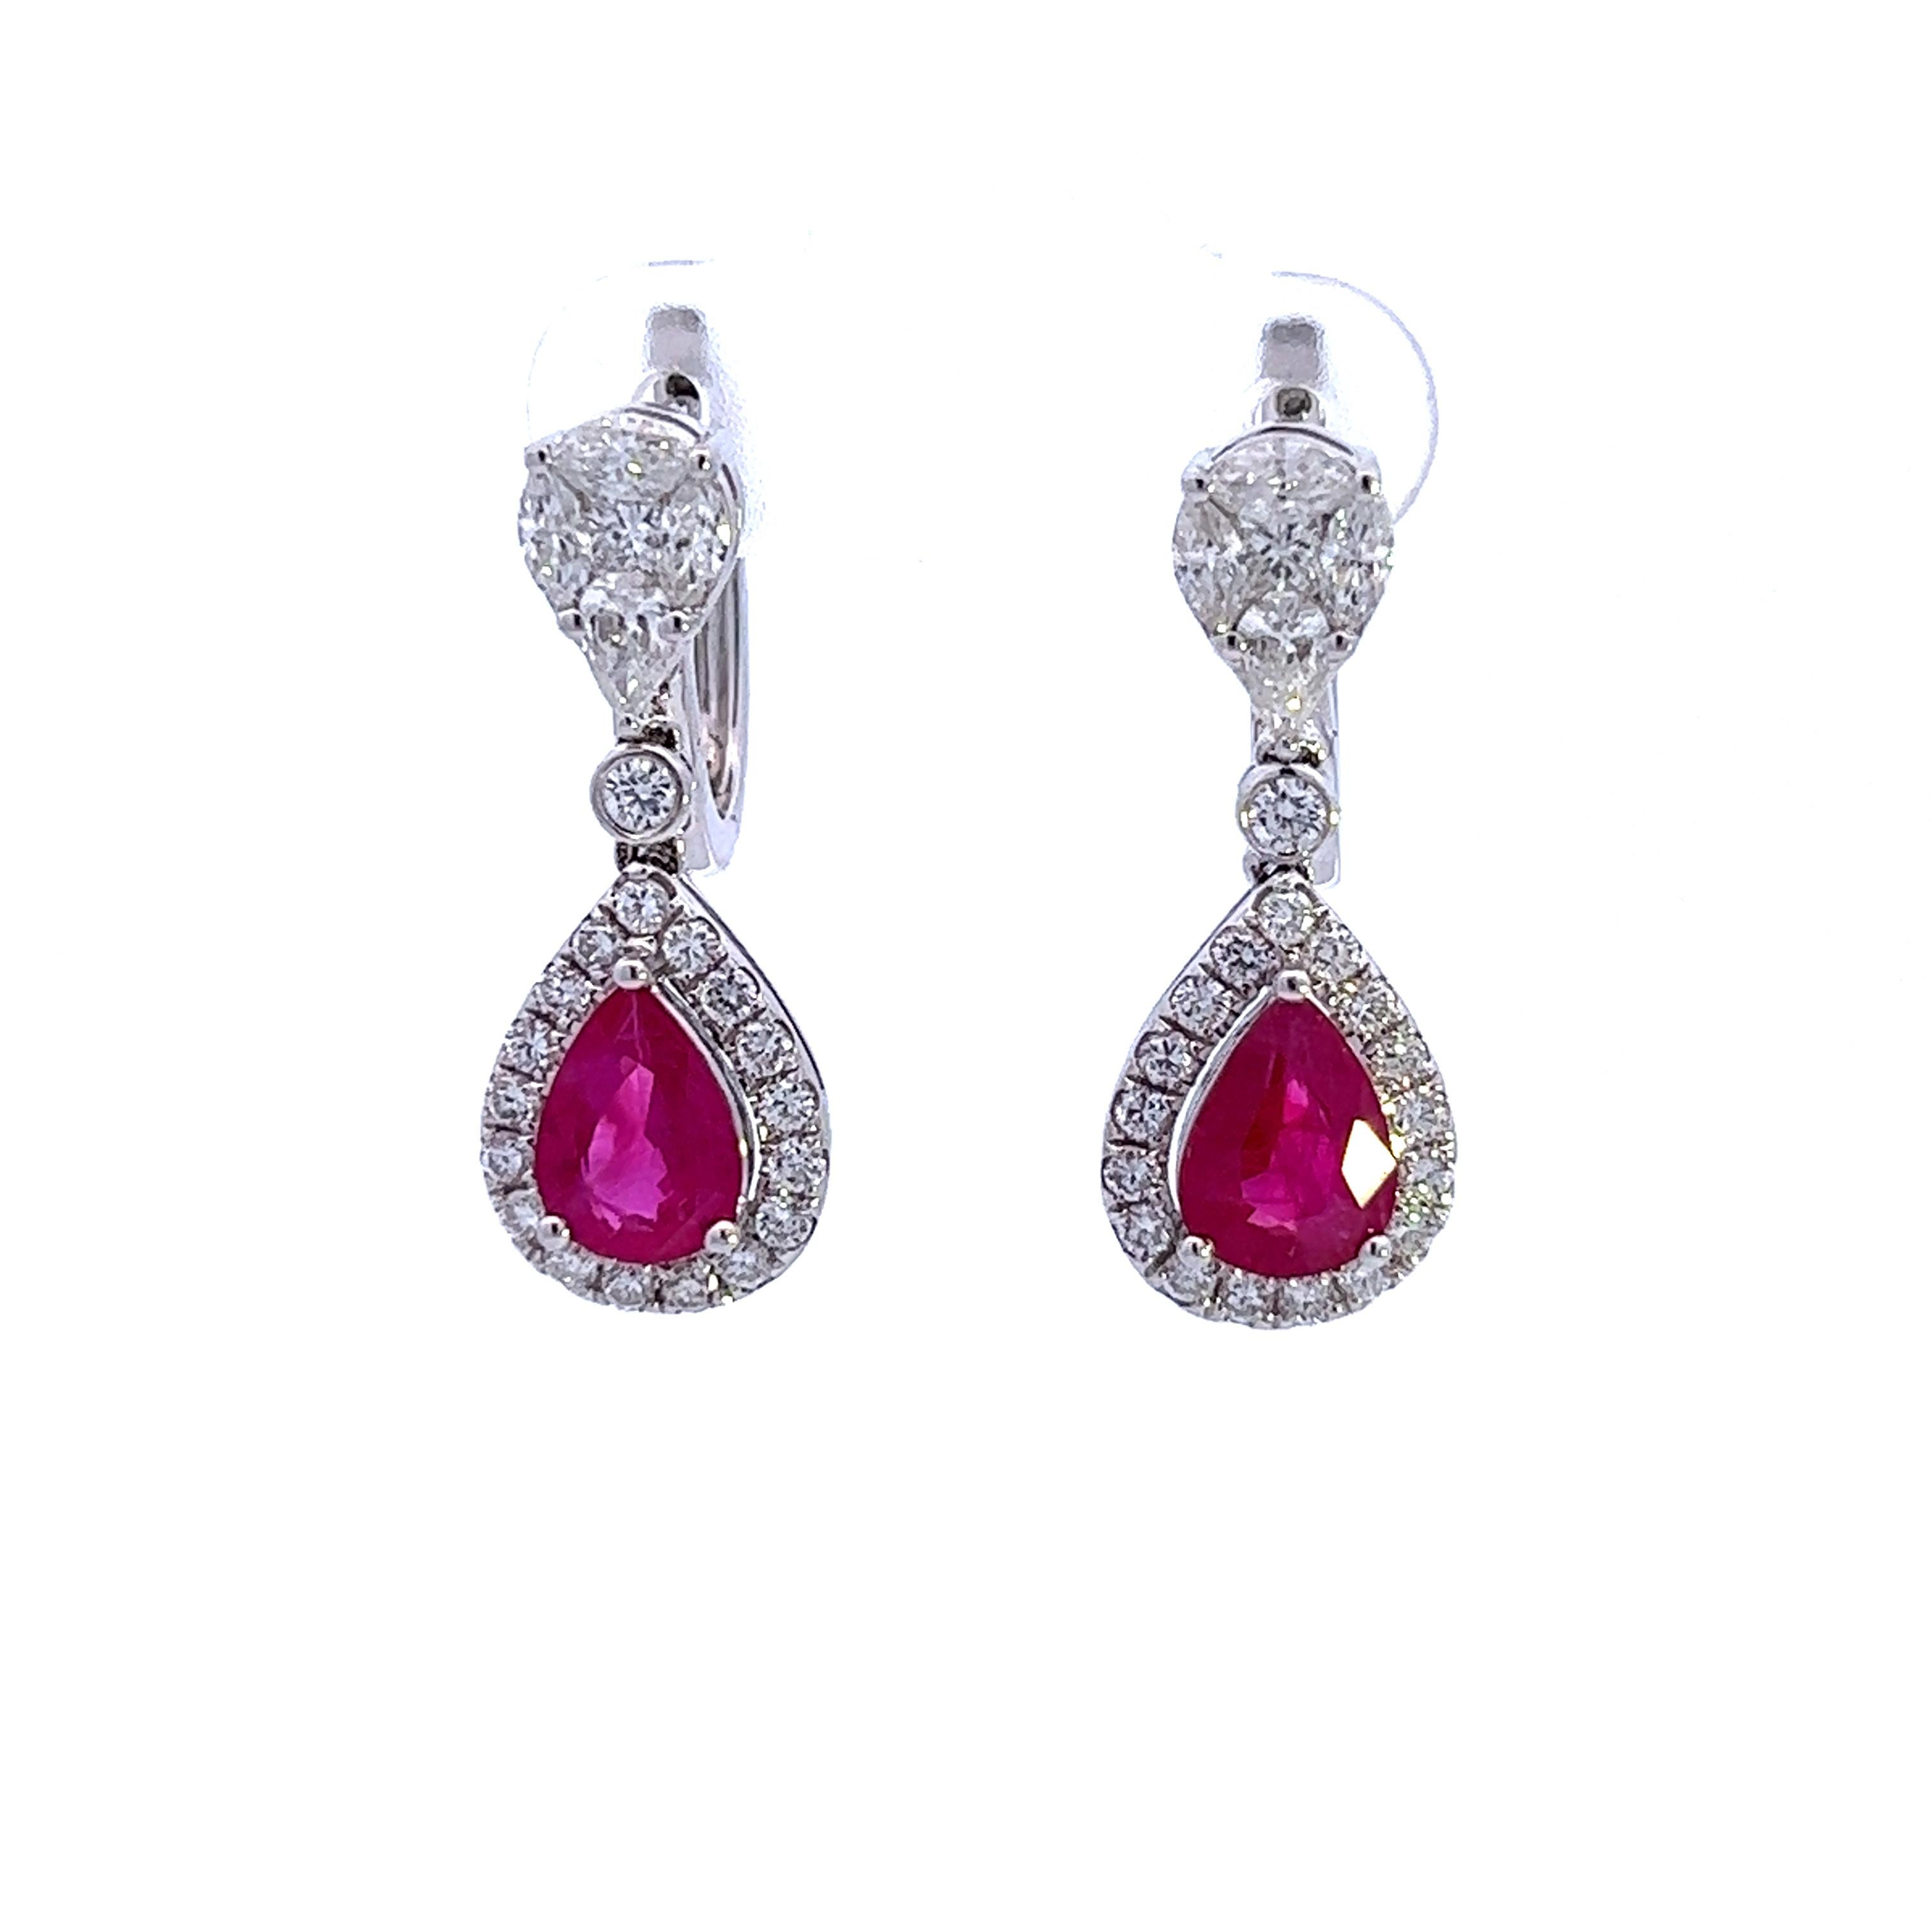 Contemporary Graceful 18 Karat White Gold Ruby and Diamond Earrings - Pear Shape For Sale